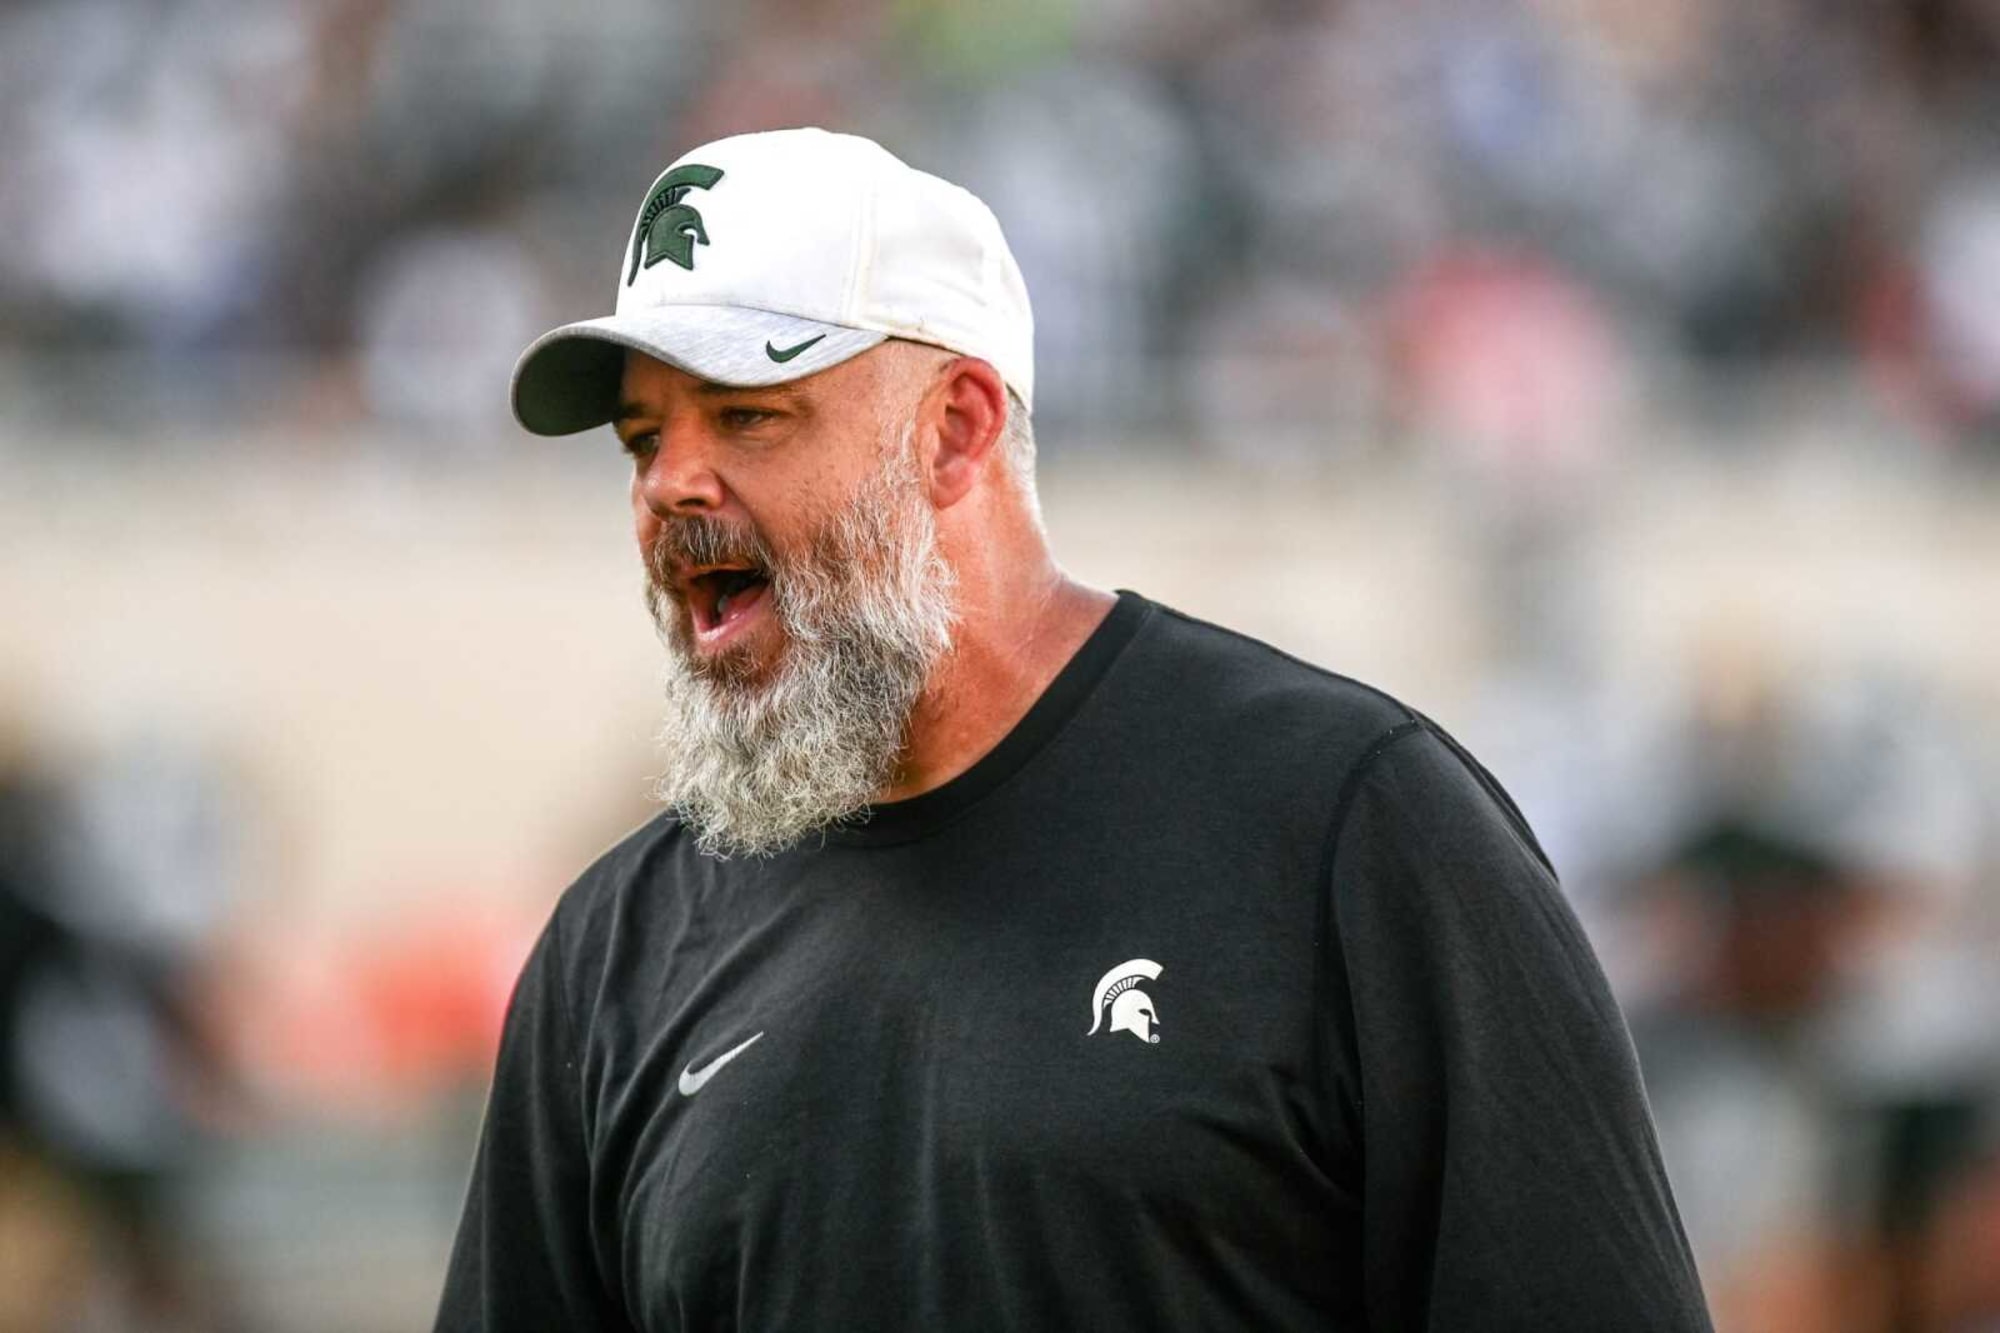 Michigan State football: Don't count Scottie Hazelton out just yet